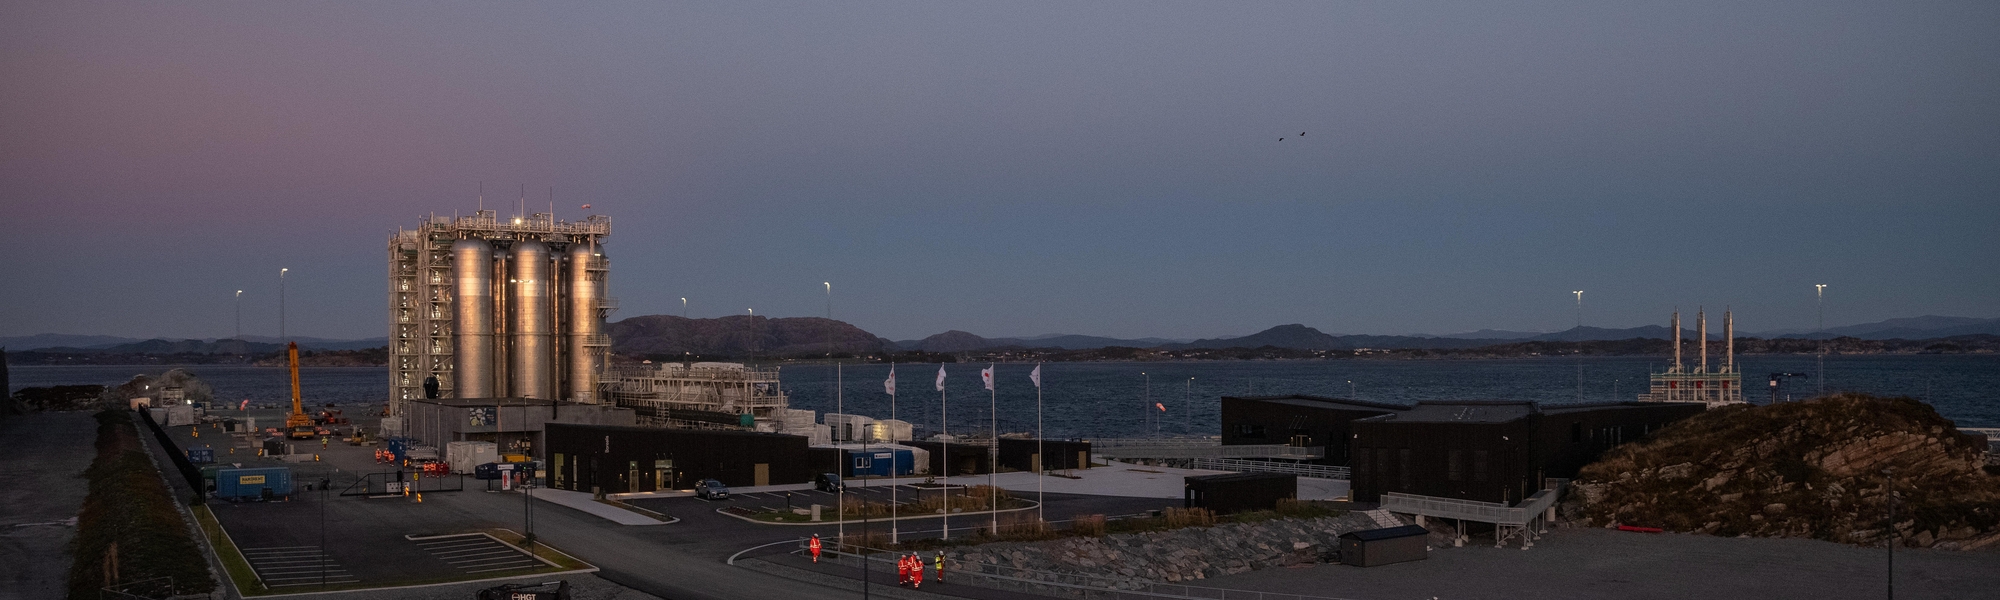 Northern Lights CCS plant in Øygarden, photographed from a distance at dusk